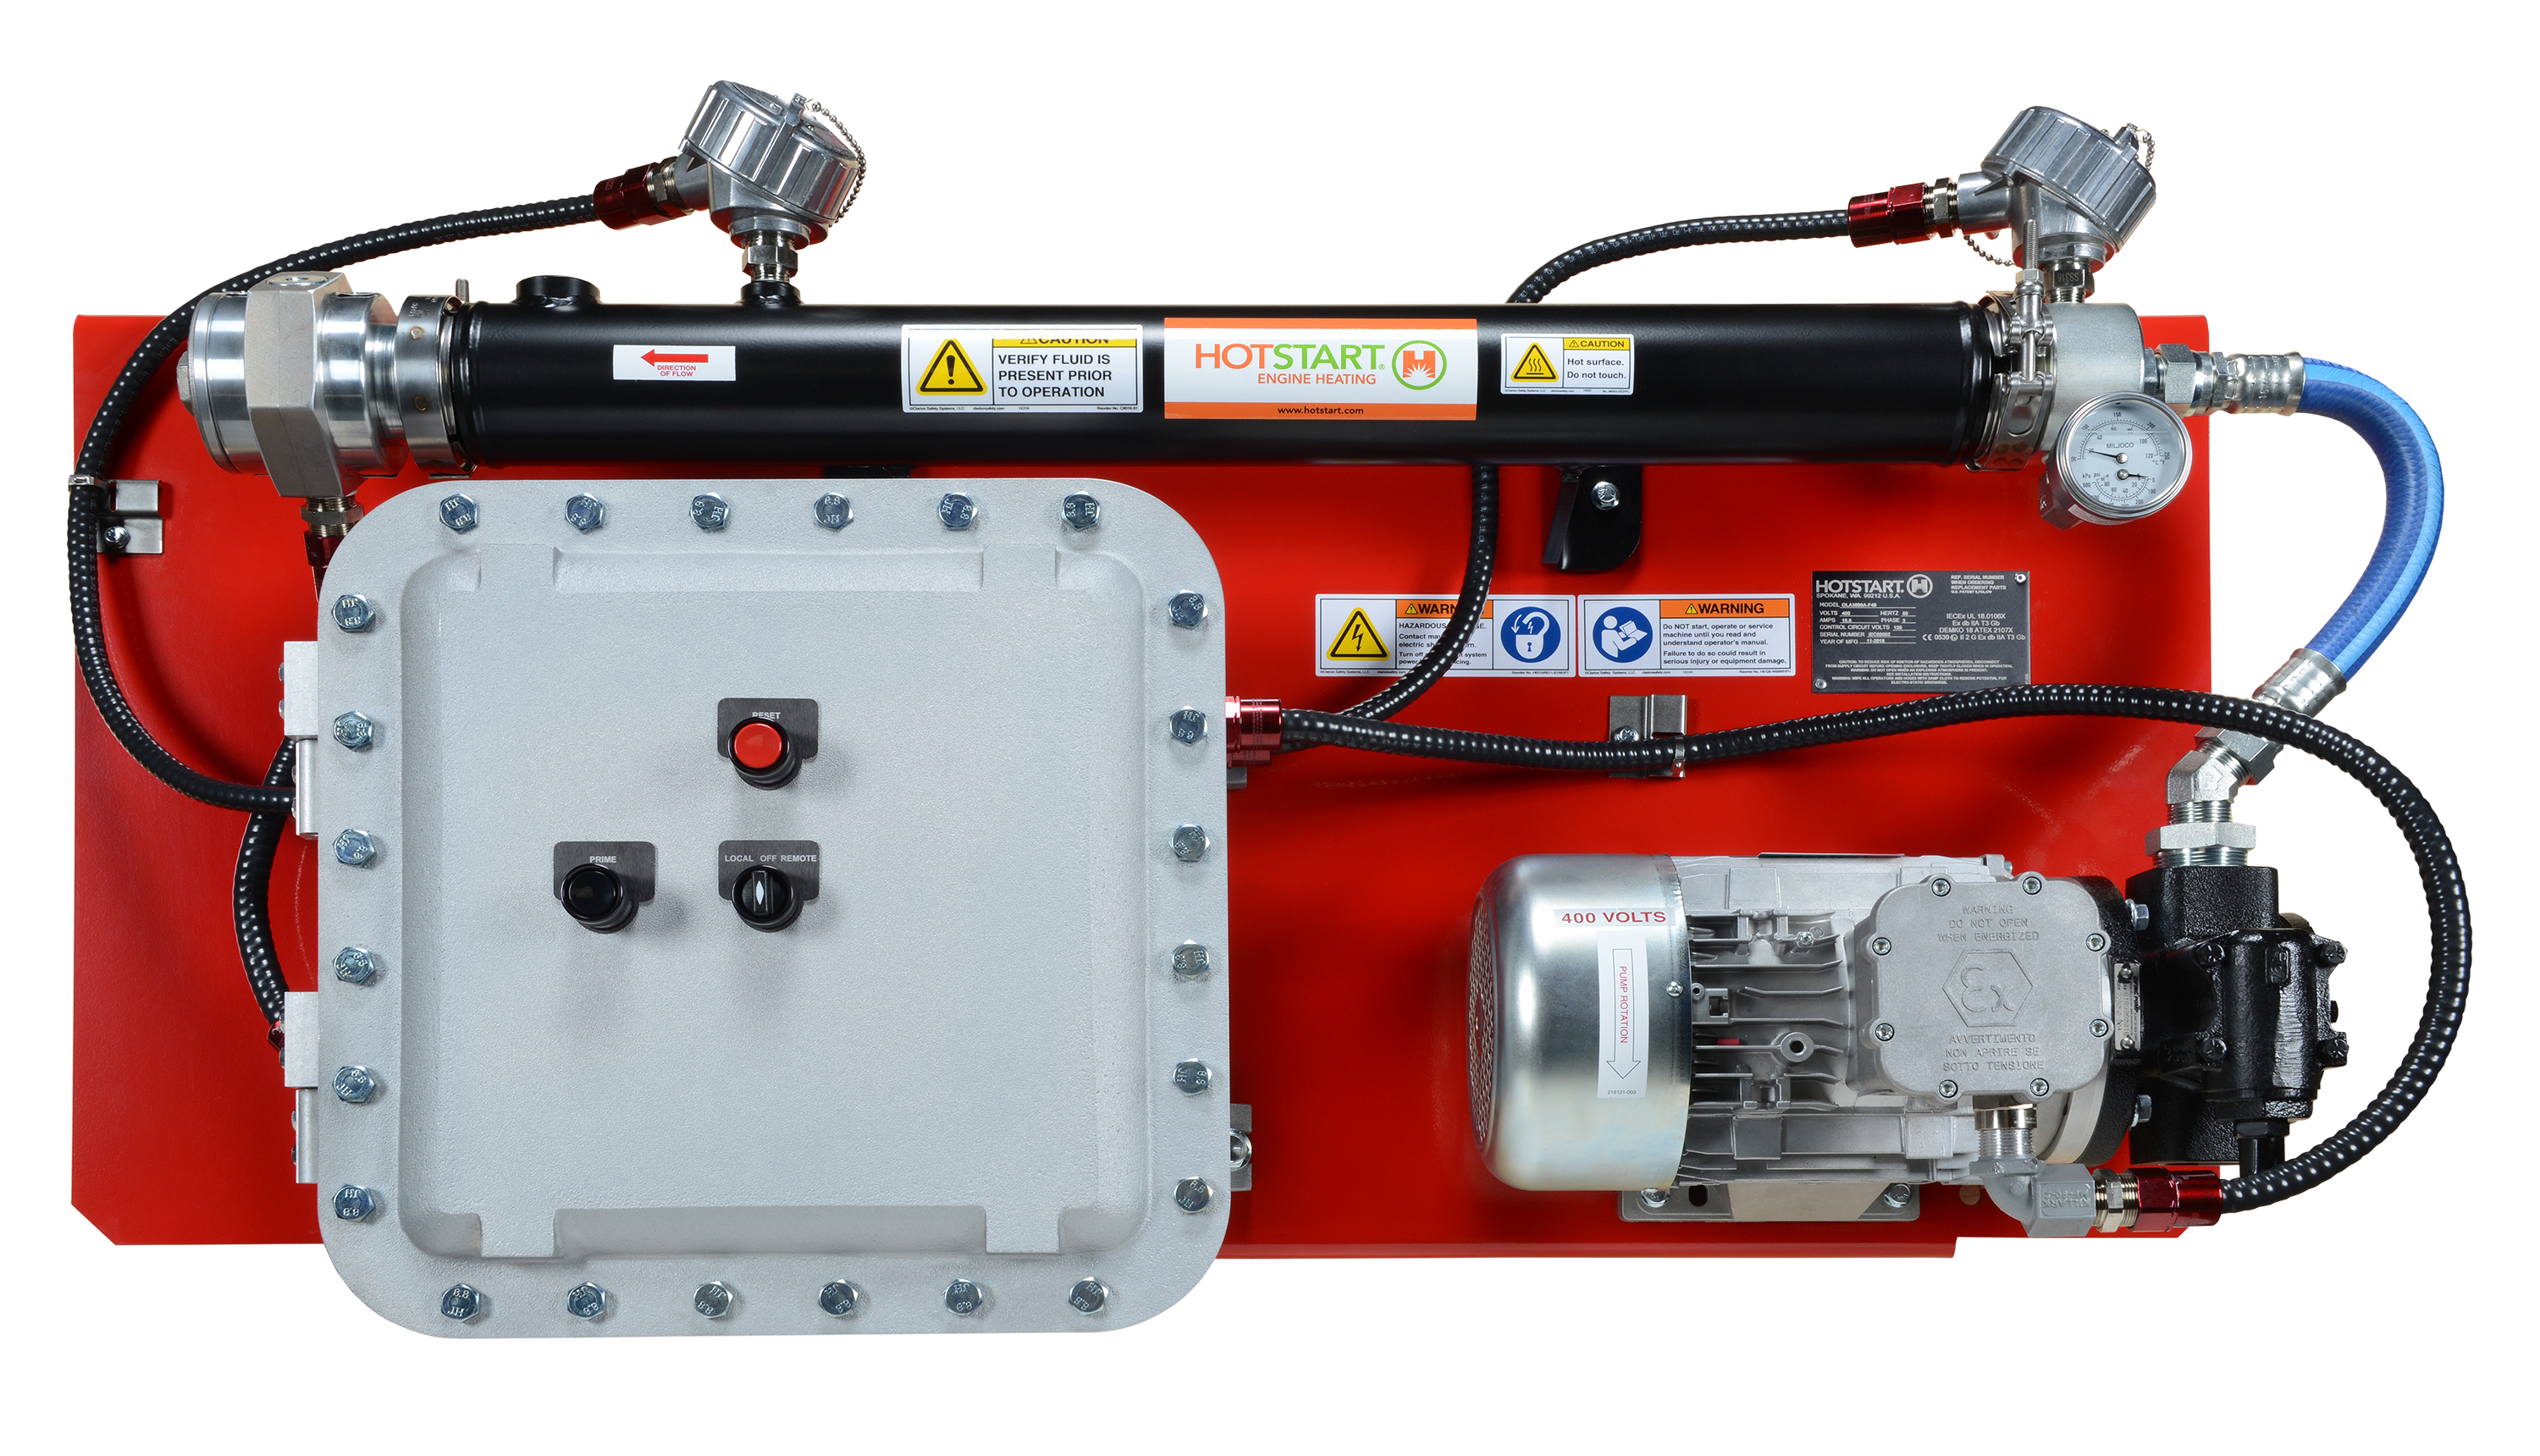 Hotstart’s OLA is the largest capacity IECEx oil heating system designed for hazardous locations.